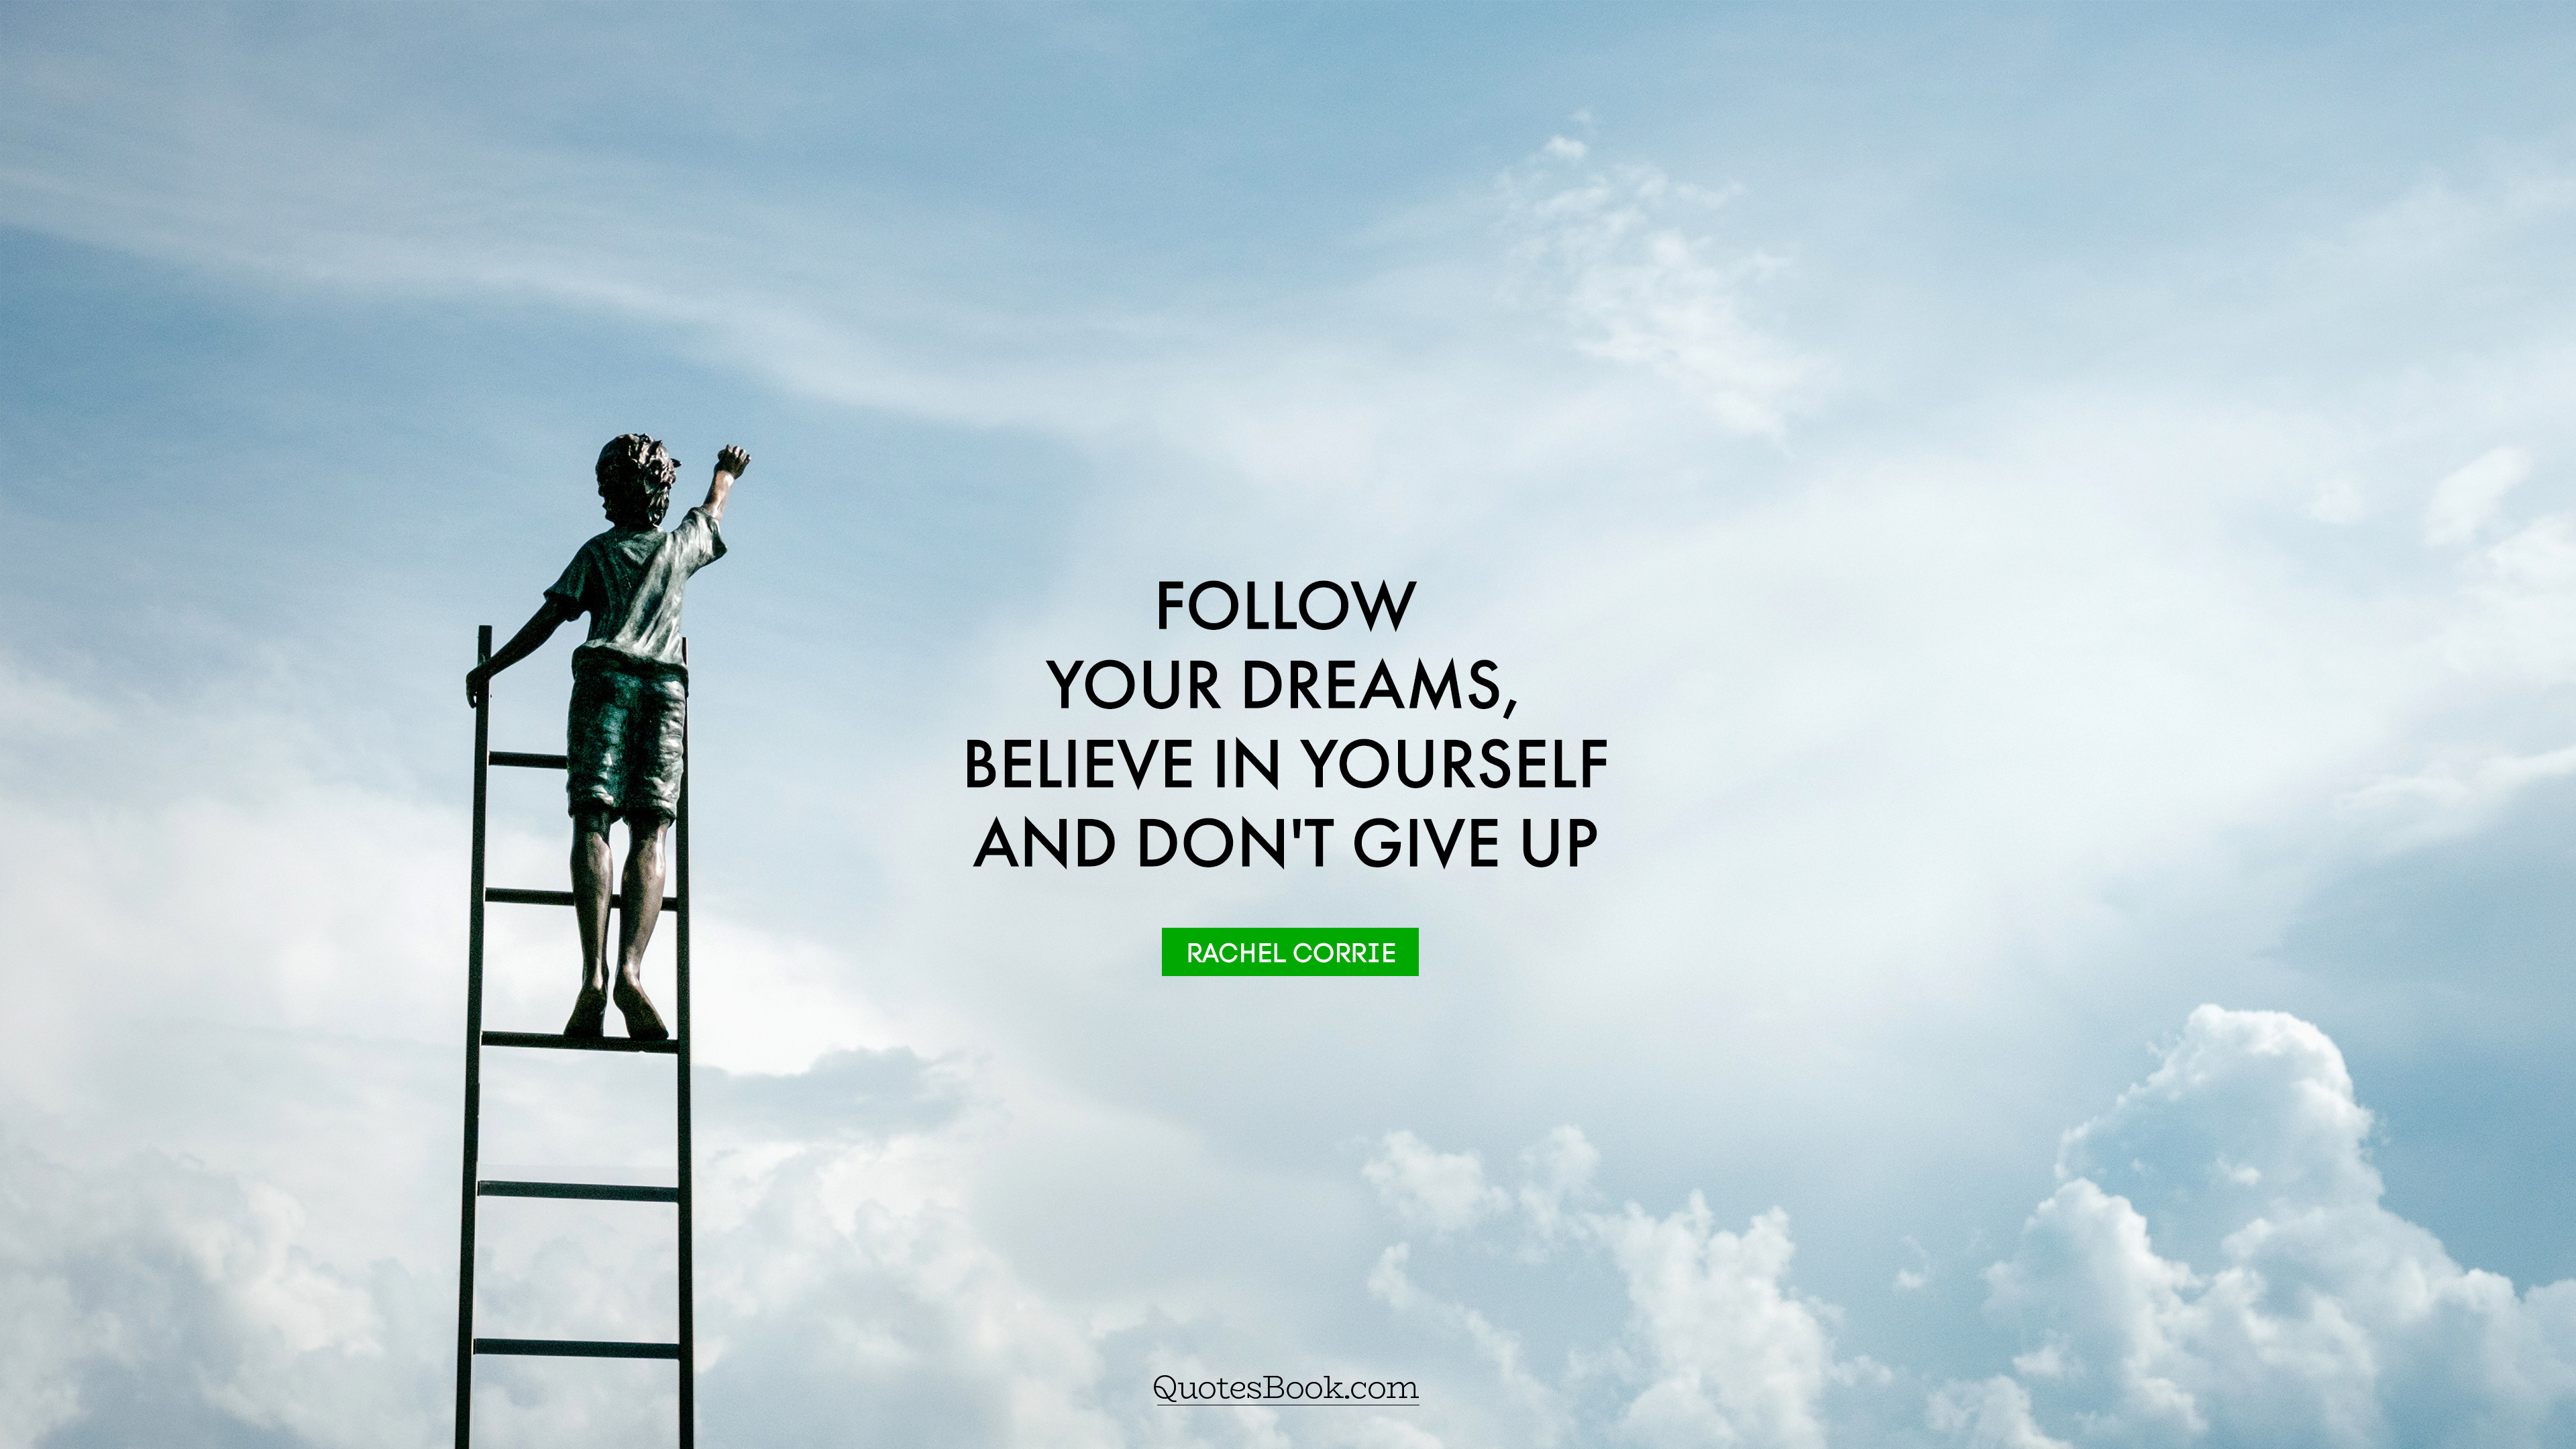 Follow your dreams, believe in yourself and don't give up. - Quote by